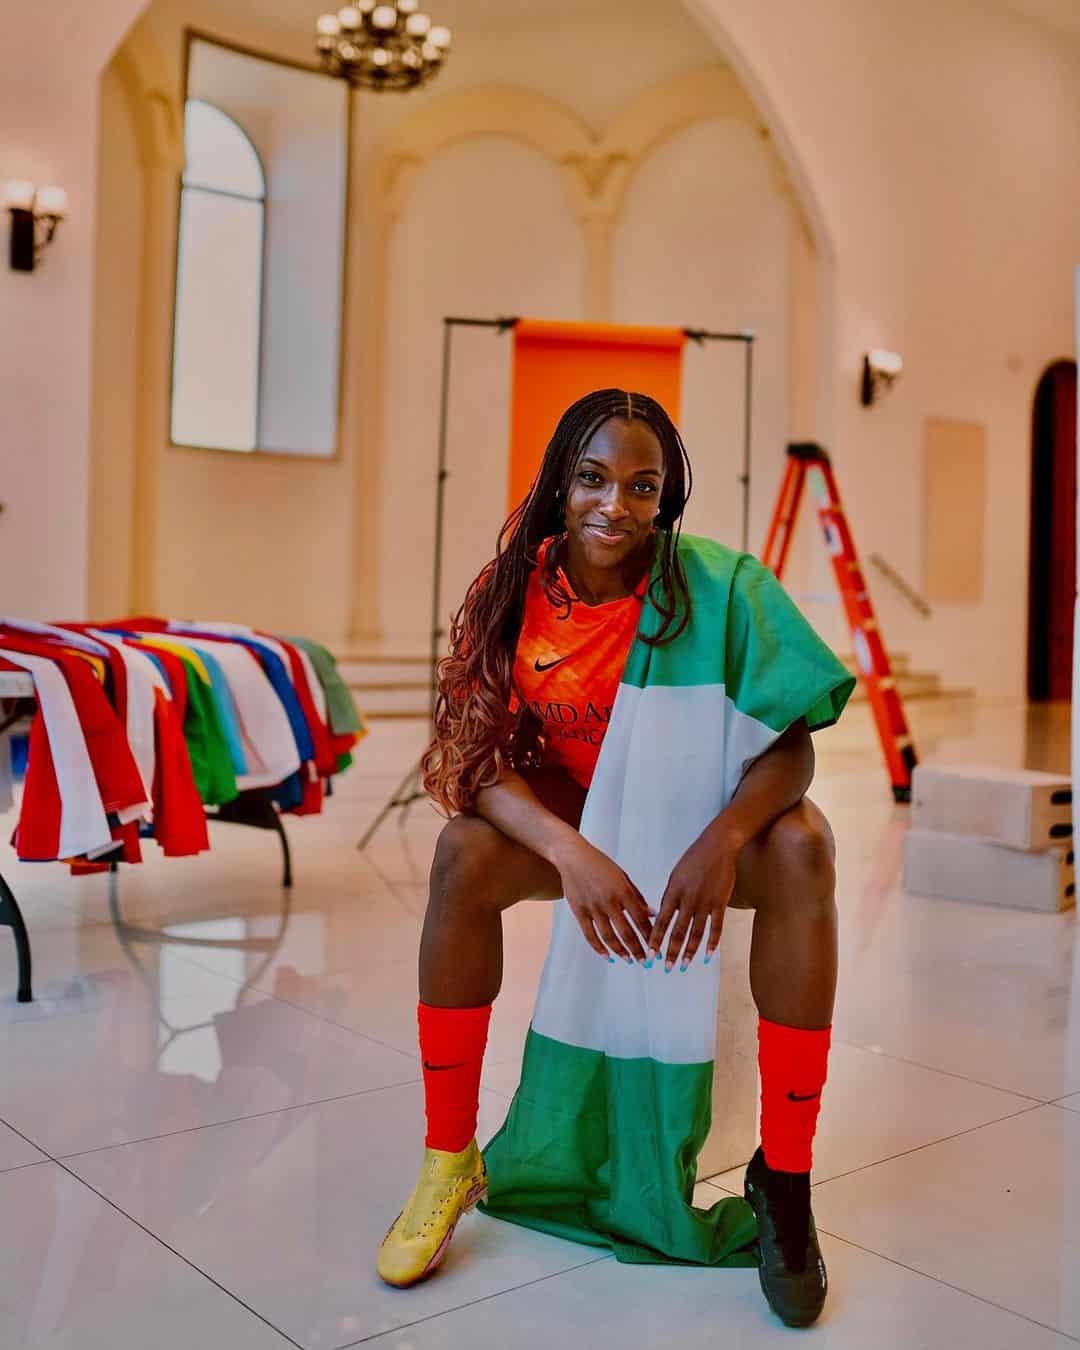 spotcovery-michelle-alozie-in-houston-dash-kit-michelle-alozie-nigerian-footballer-scientist-who-won-hearts-at-the-fifa-womens-world-cup